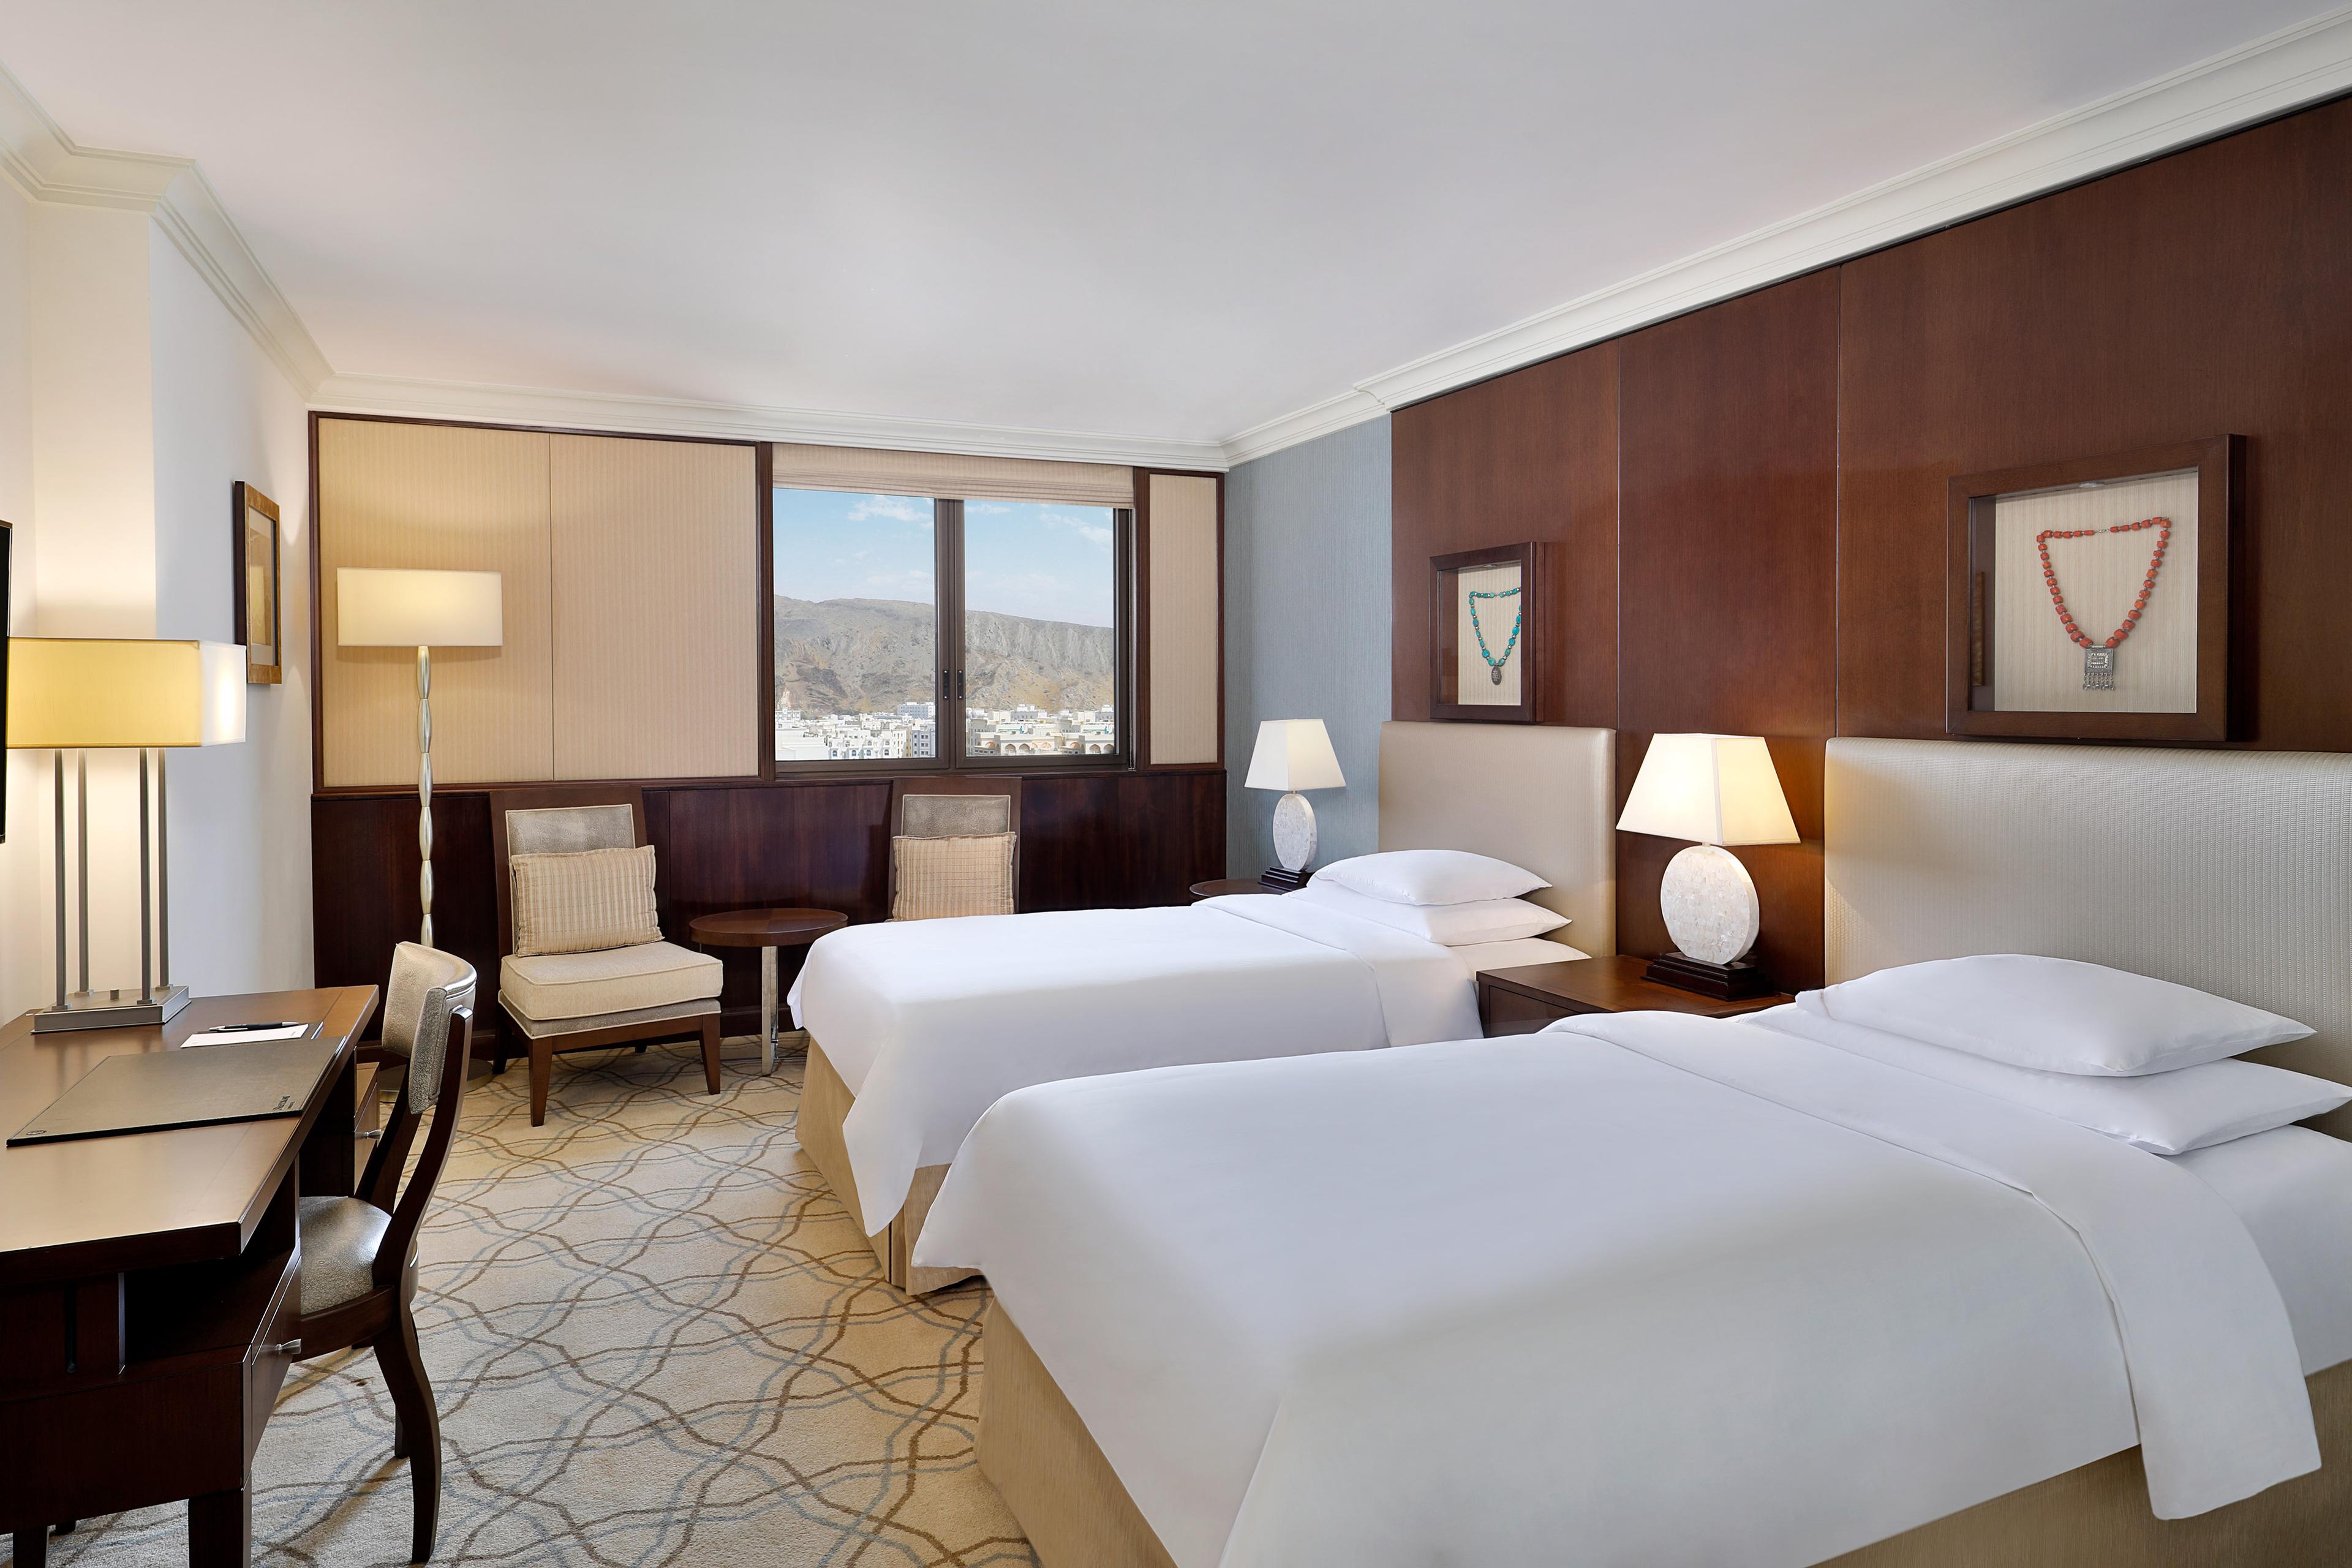 Travel to Muscat with a colleague or a friend, and reserve one of our twin/twin club guest rooms, featuring two plush beds for the space and comfort you deserve.